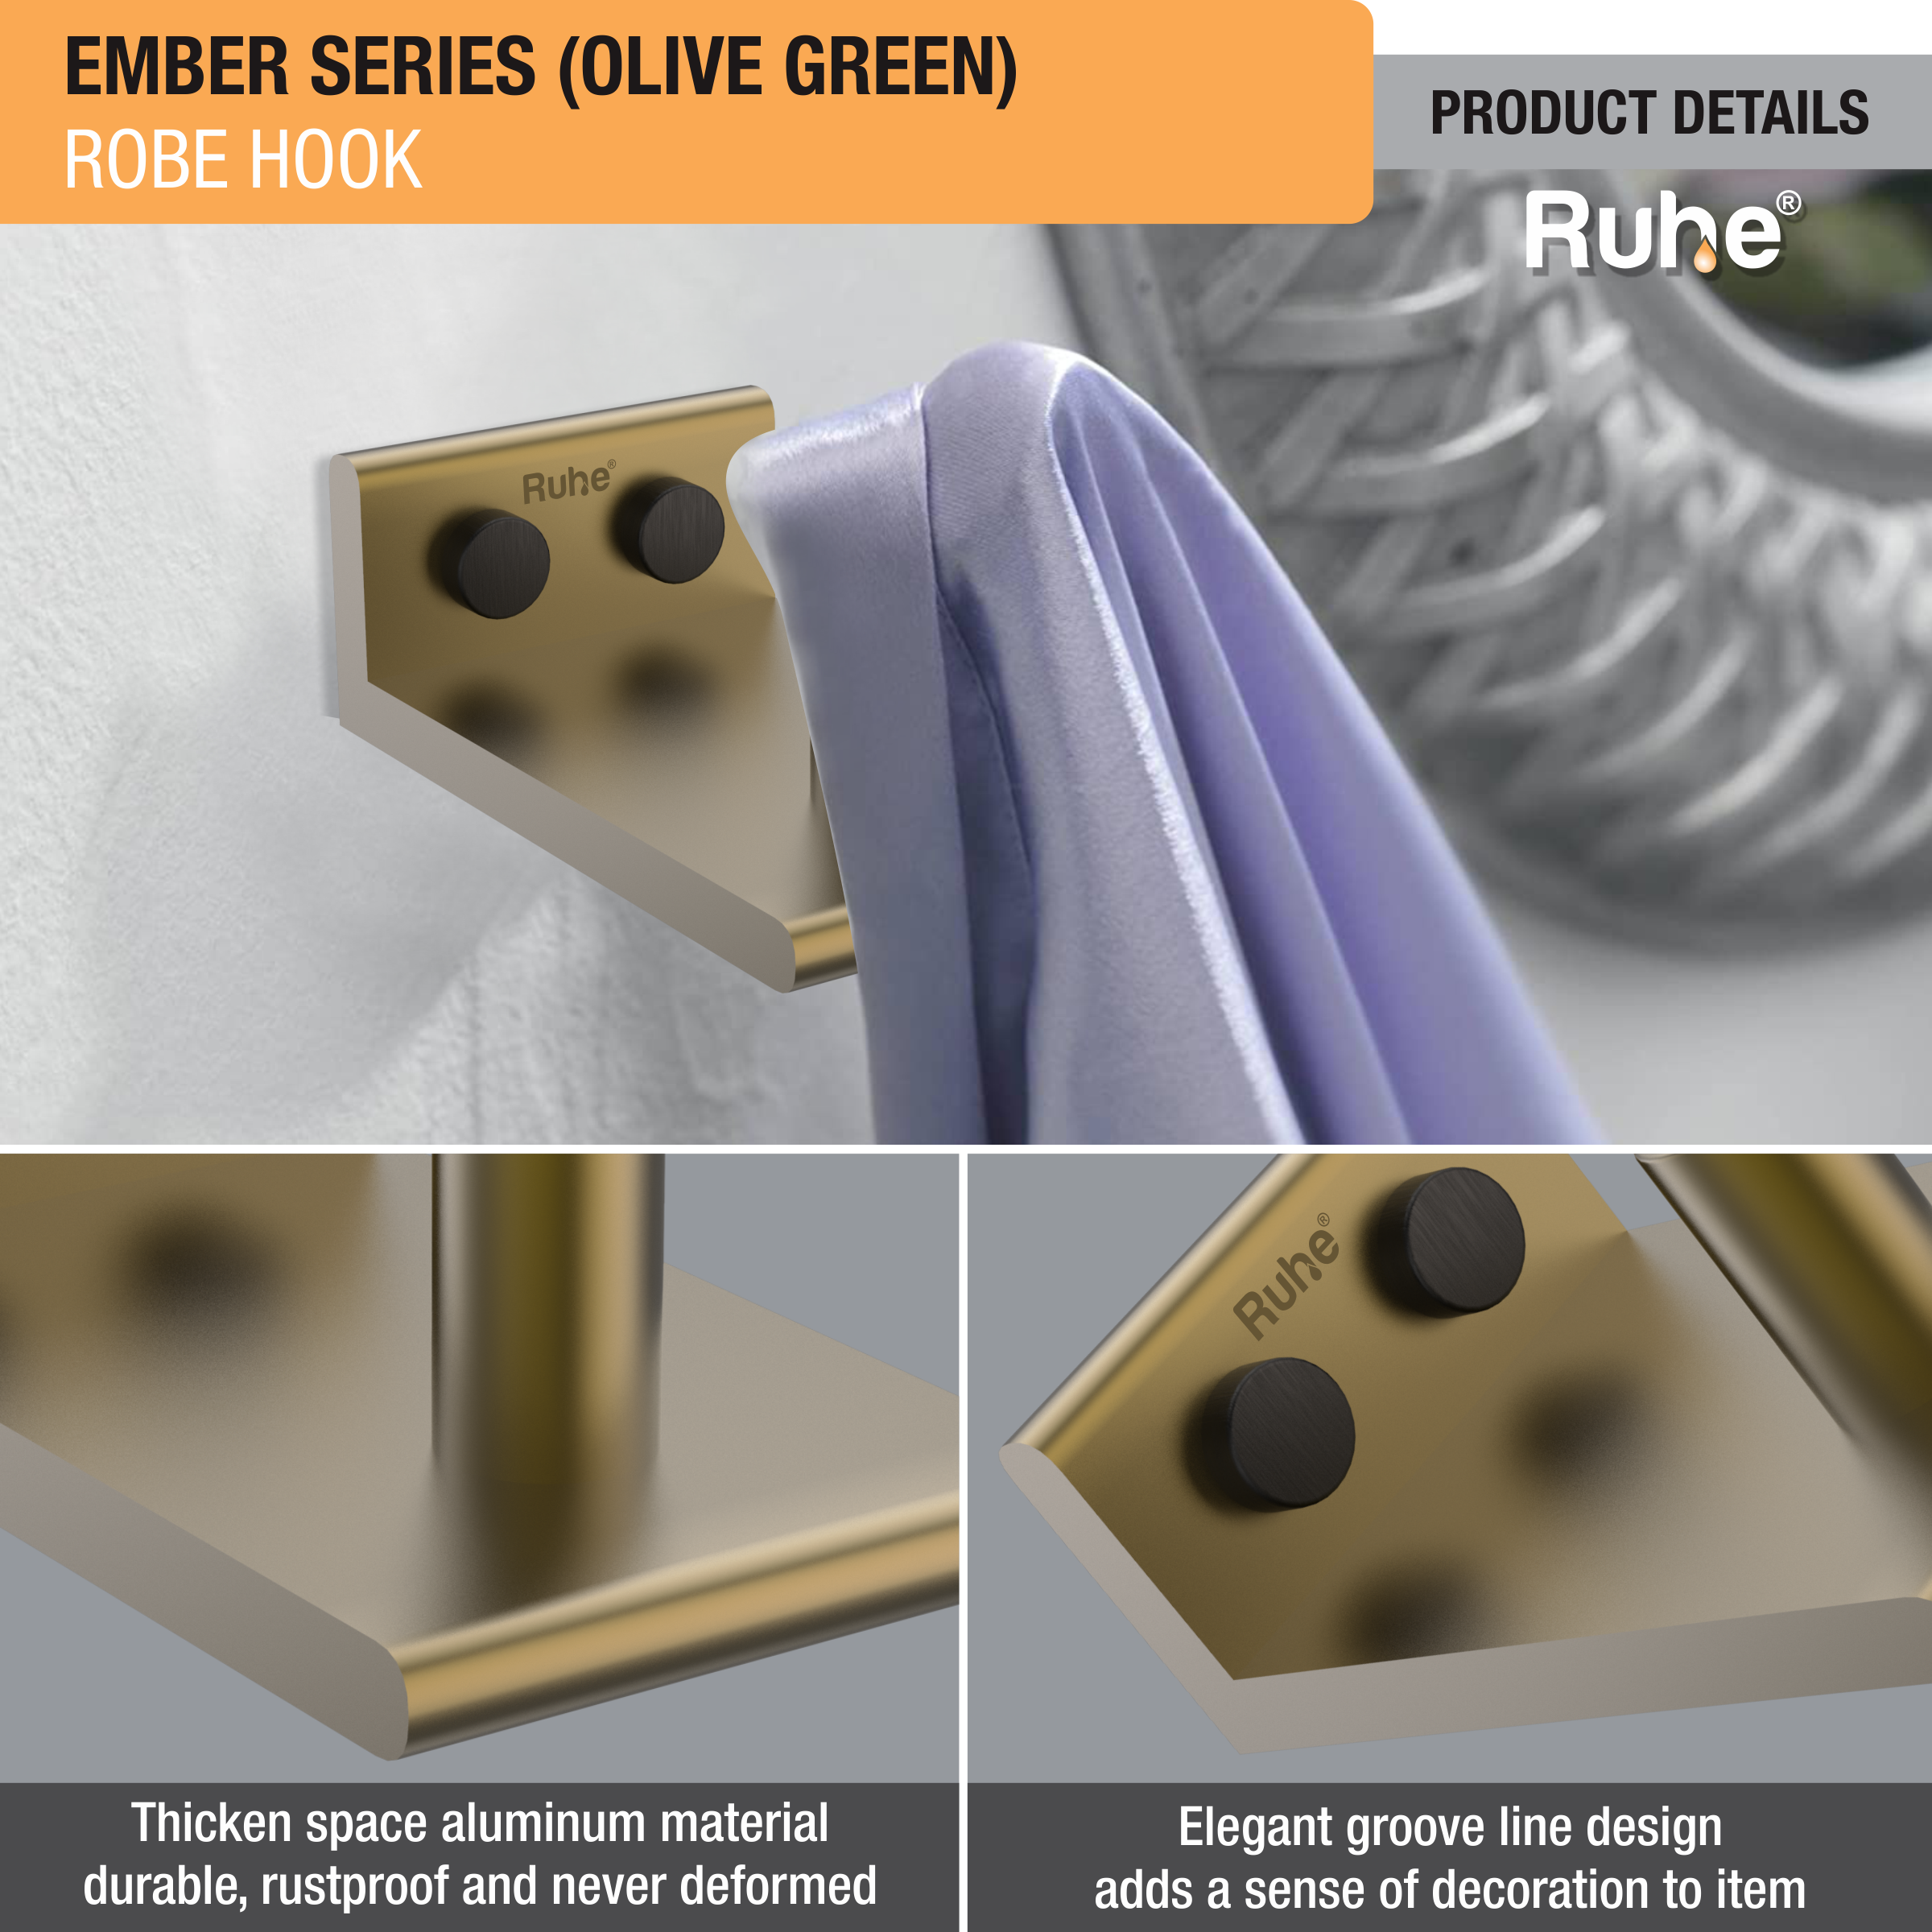 Ember Olive Green Robe Hook (Space Aluminium) product details